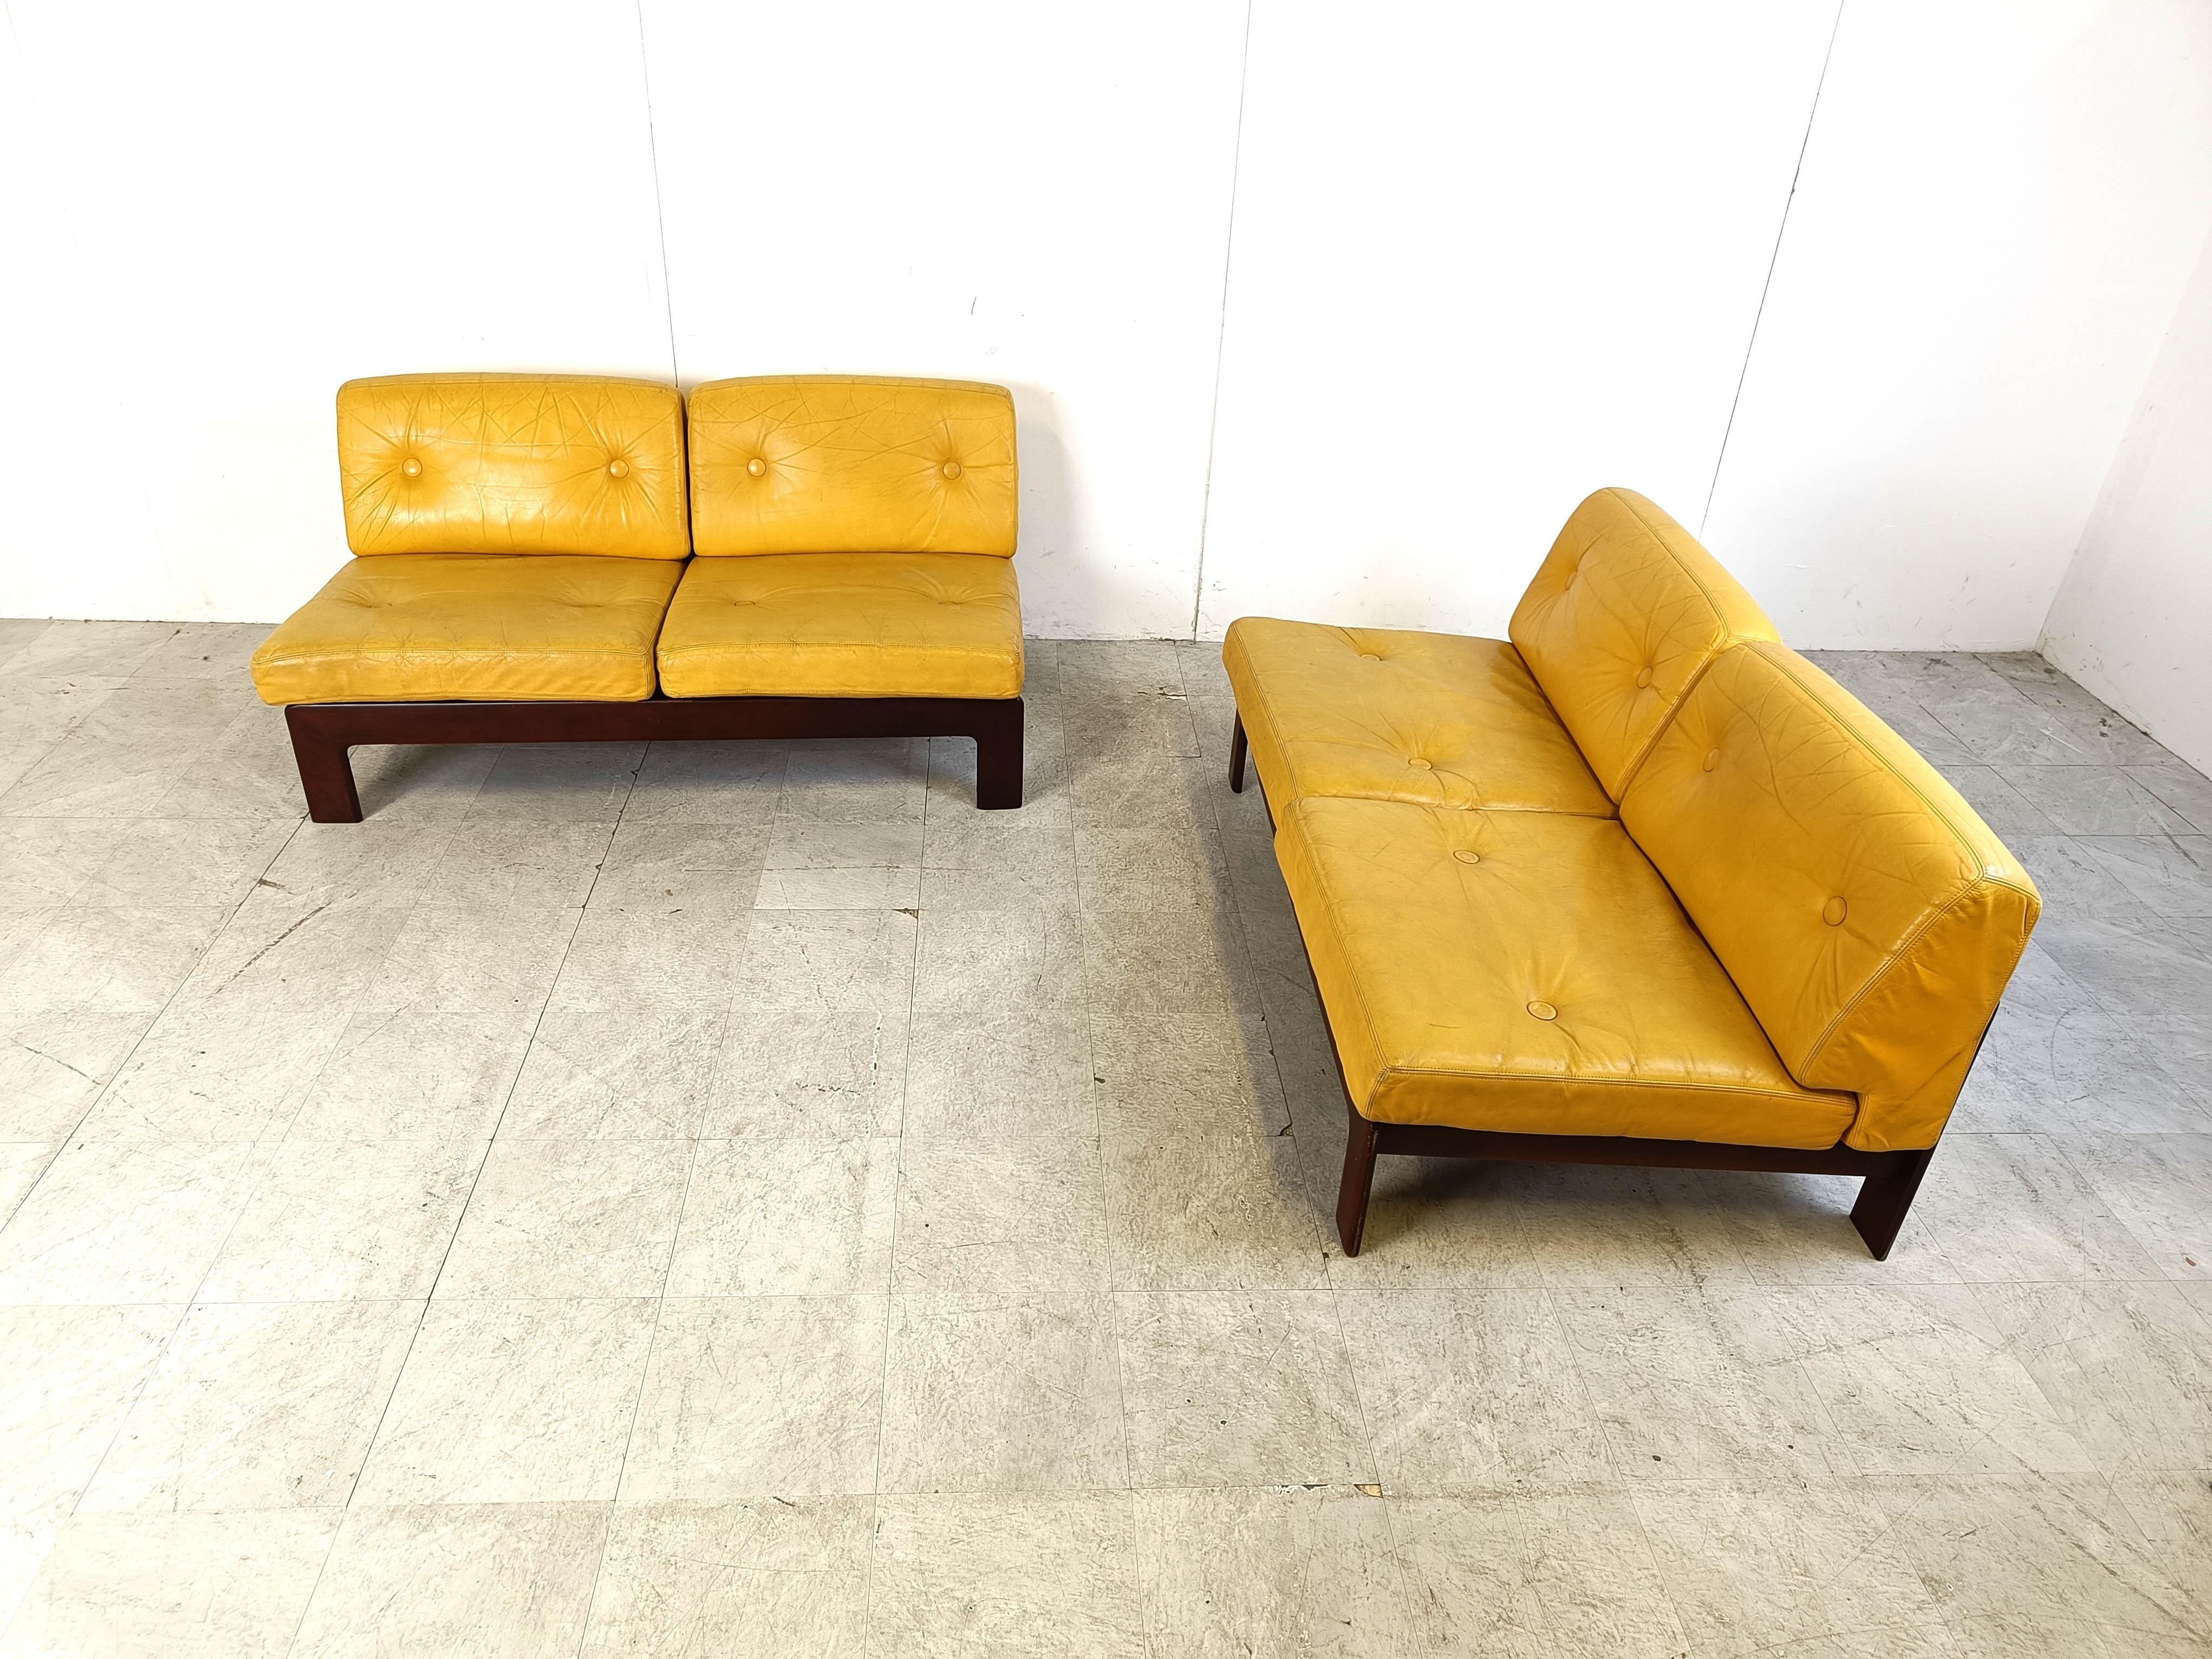 Yellow leather sofa set by drulet.

Wooden frames with yellow leather cushions.

Timeless mid century pieces.

1960s - Switzerland

Dimensions of each element:
Height: 70cm
Width: 70cm
Depth: 82cm
Seat height: 40cm

Ref.: 305252

*Price is for the